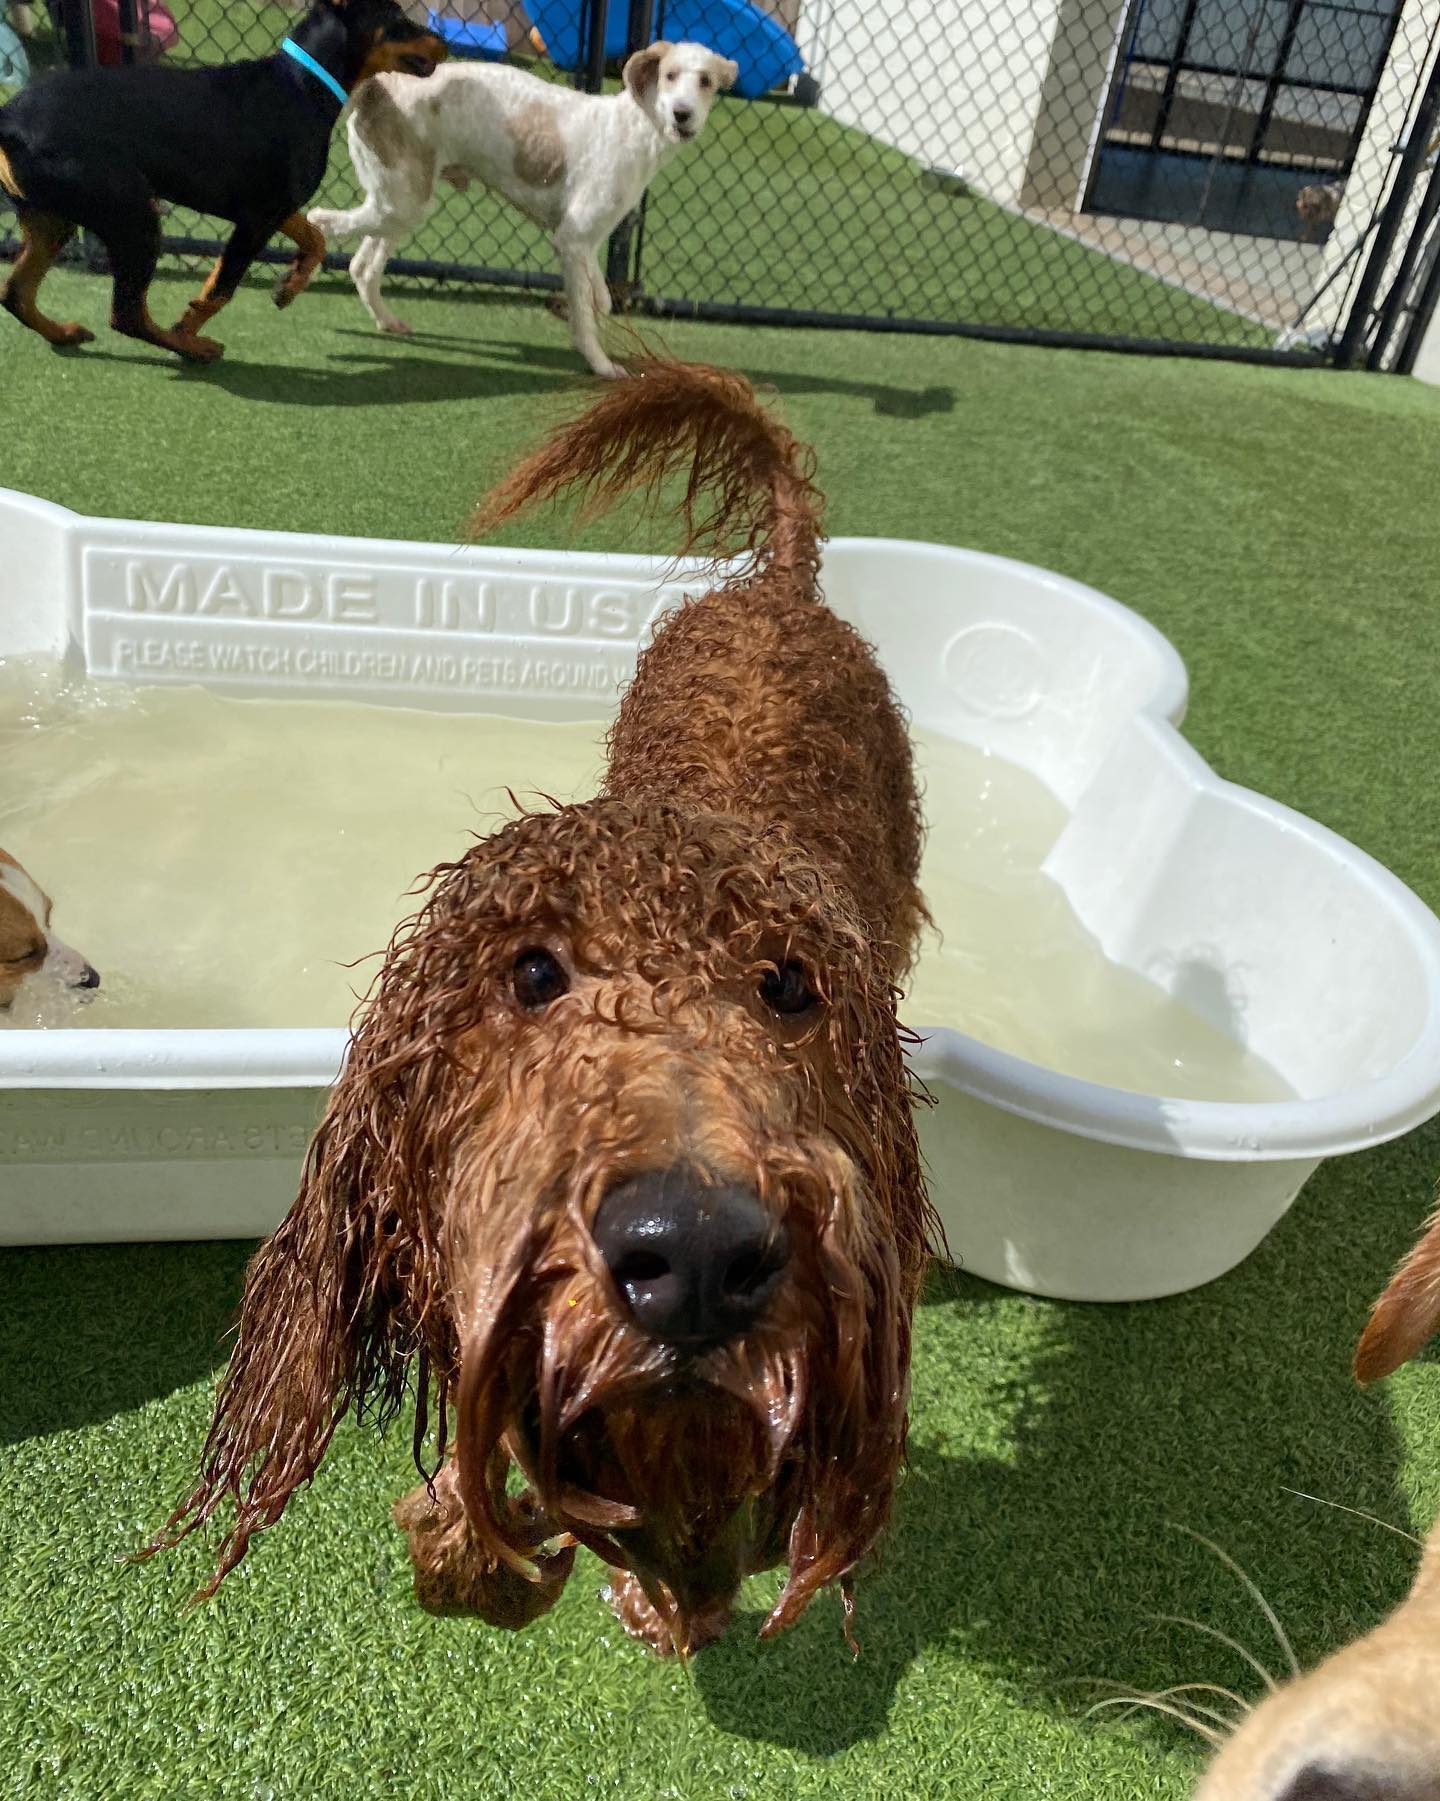 https://www.houndslounge.com/wp-content/uploads/2020/08/wet-dog-at-doggy-daycare-in-North-Little-Rock.jpg